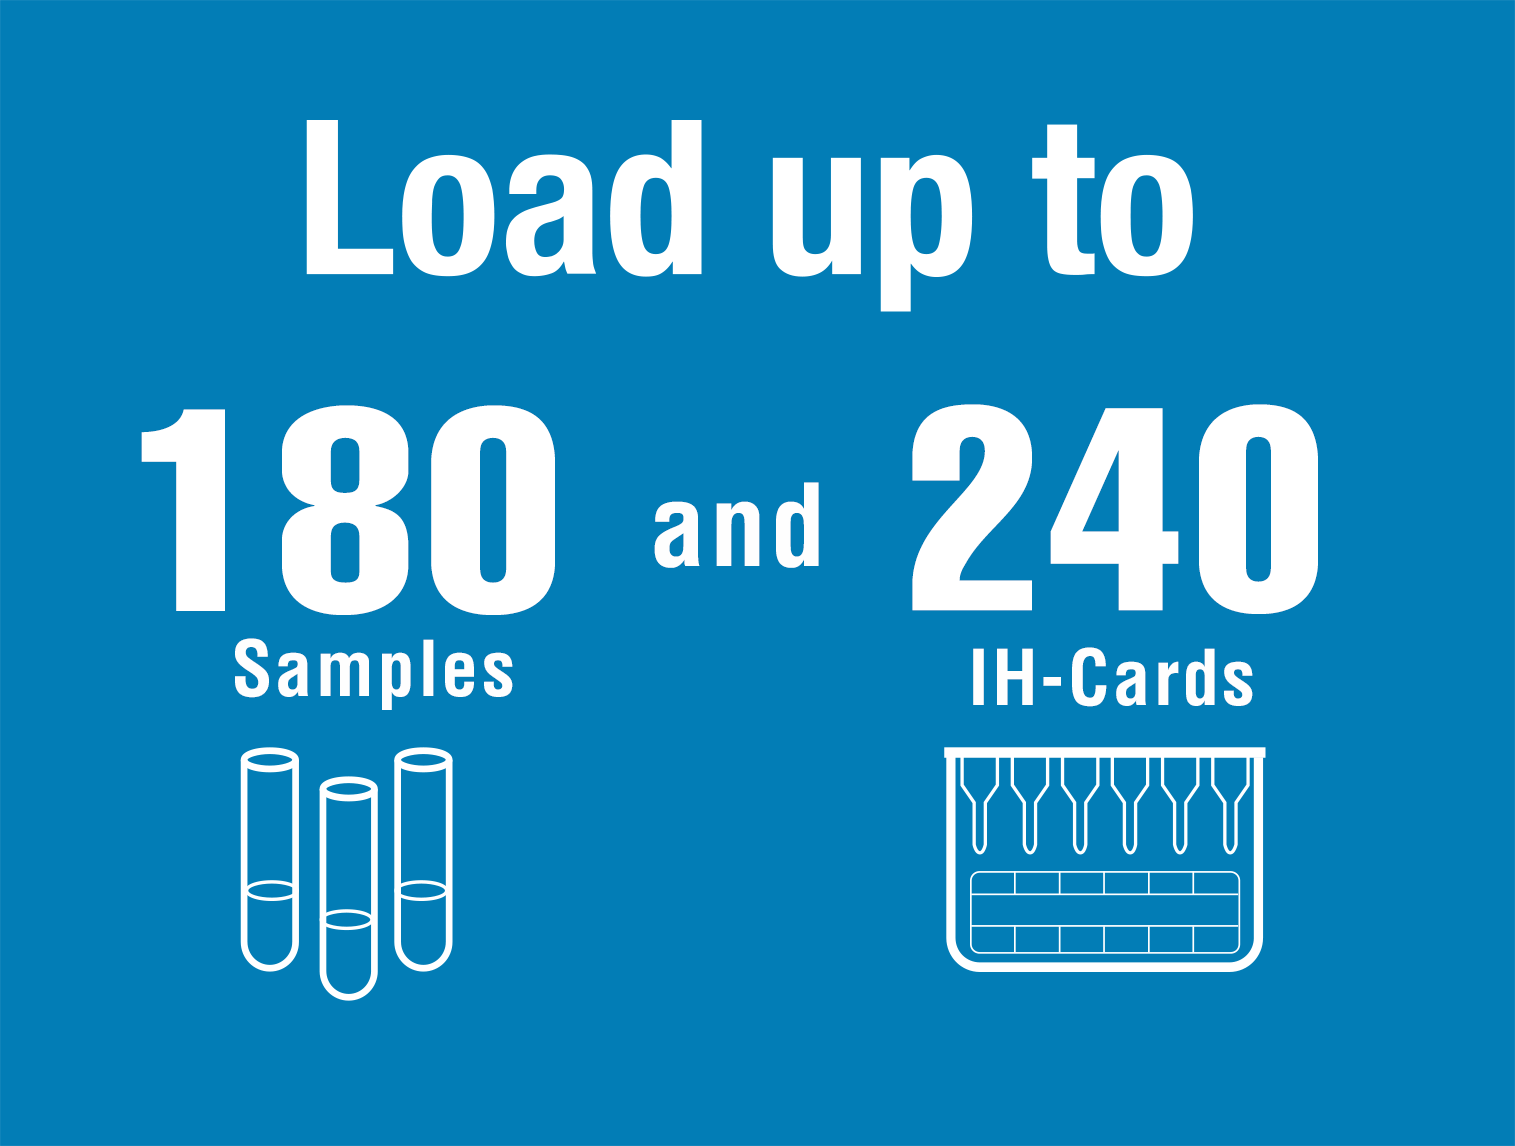 load up to 1800 samples and 240 id-cards